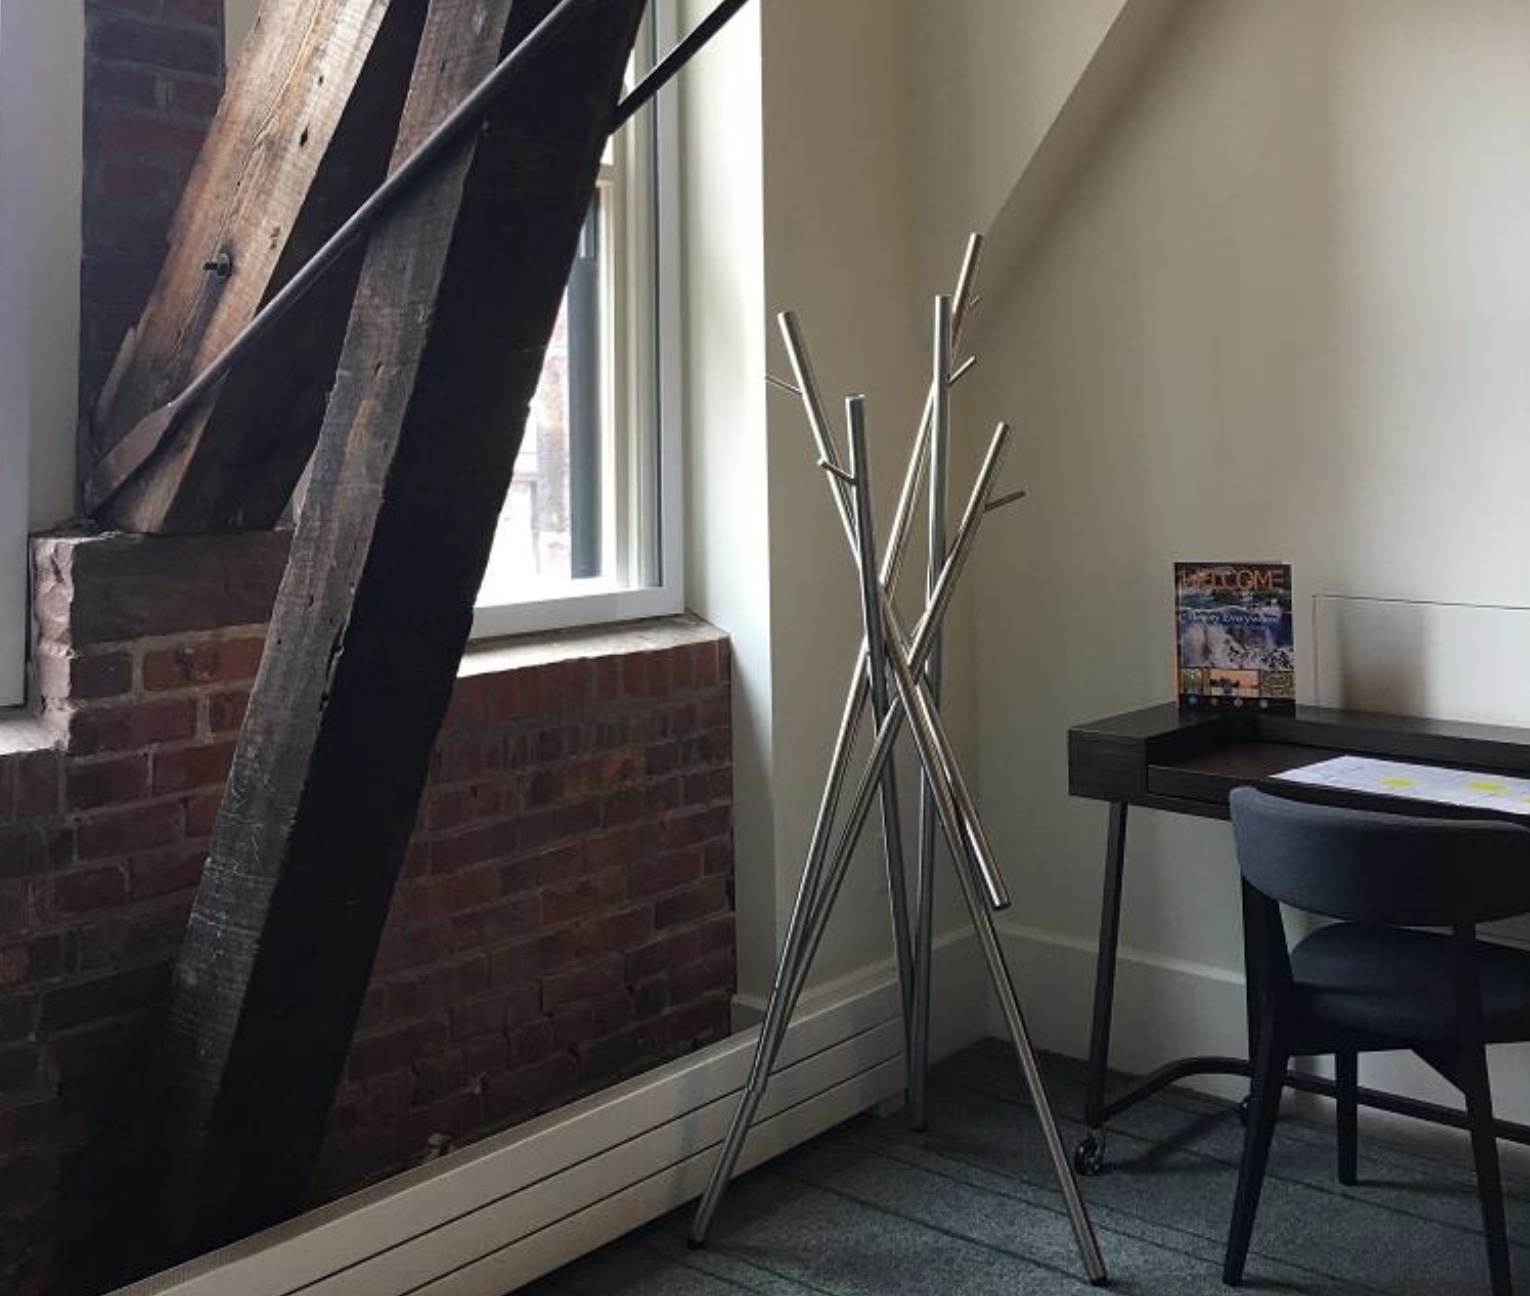 The coat rack is a combo of stainless steel sticks, that's why it's called so